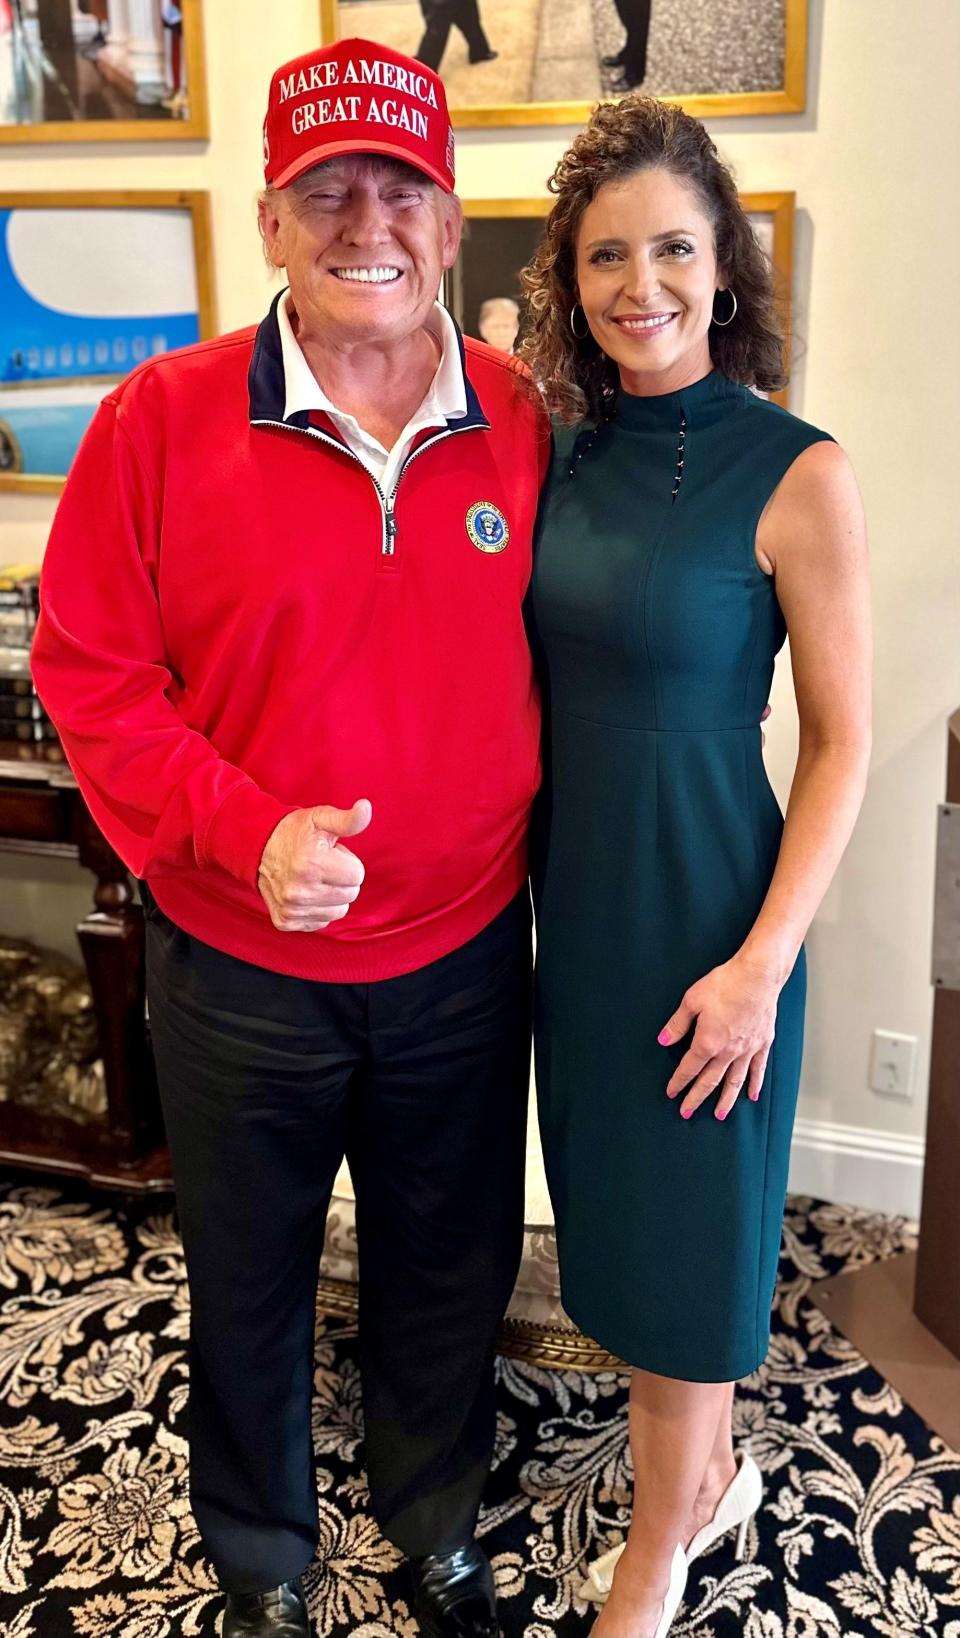 Former President Donald Trump endorsed Louisiana Republican Congresswoman Julia Letlow after a meeting Wednesday at his Mar-a-Lago resort. The photo was taken after the meeting and submitted by Letlow's staff.